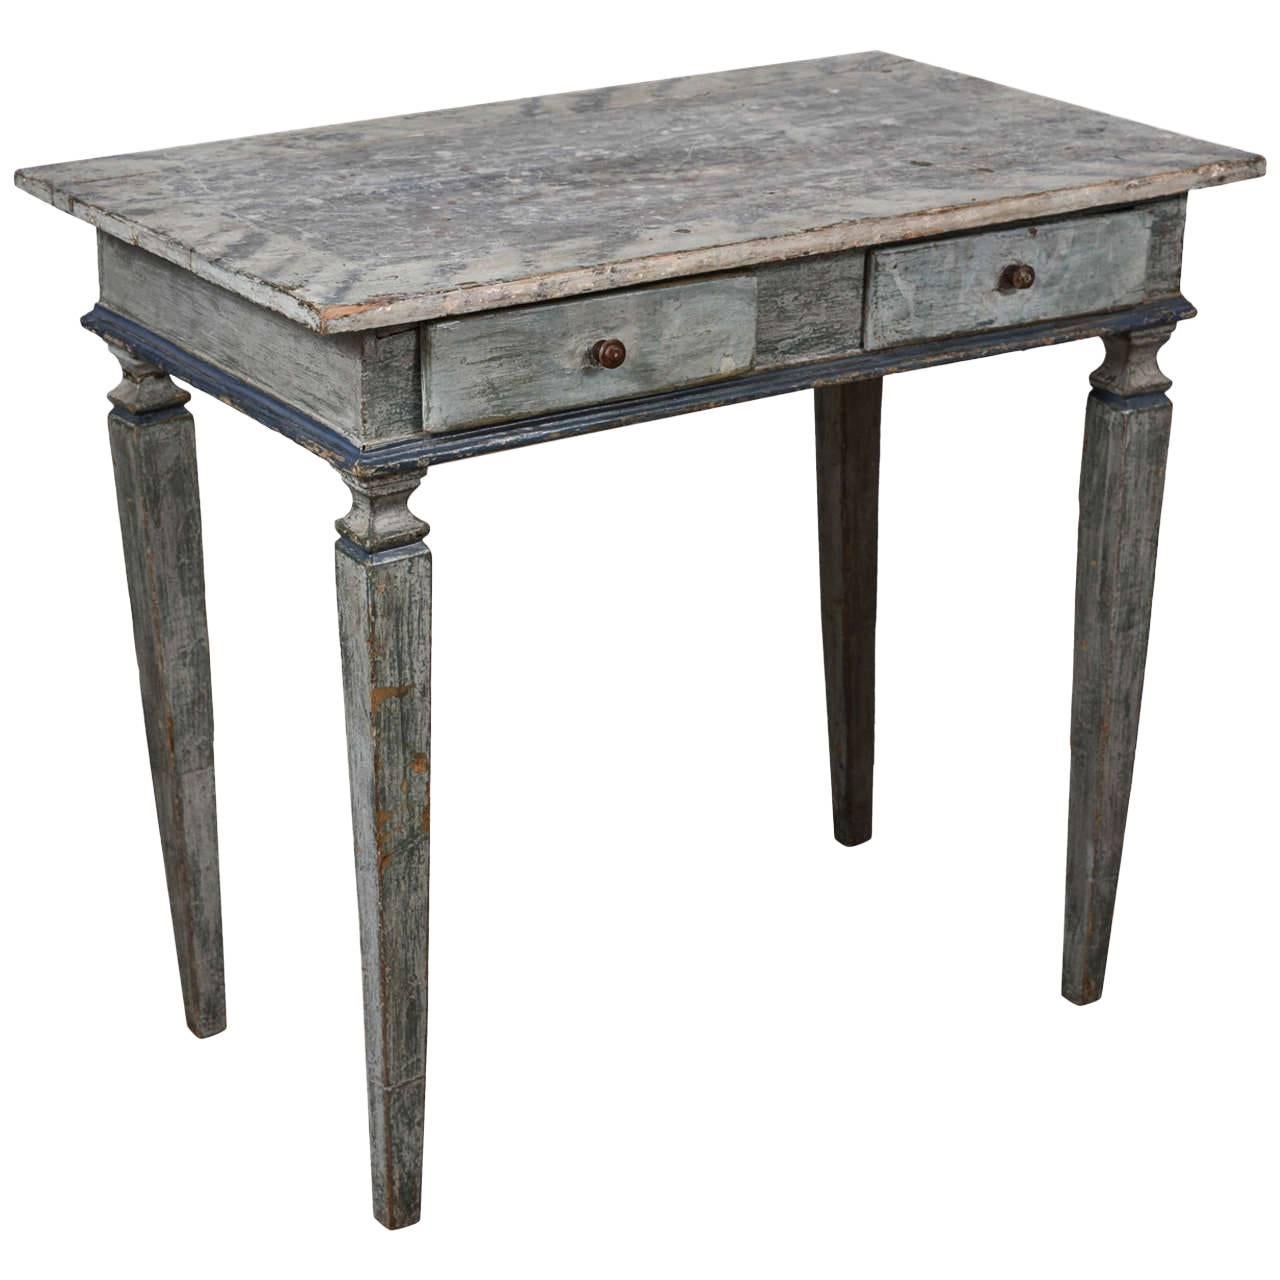 18th Century Painted Table from Italy